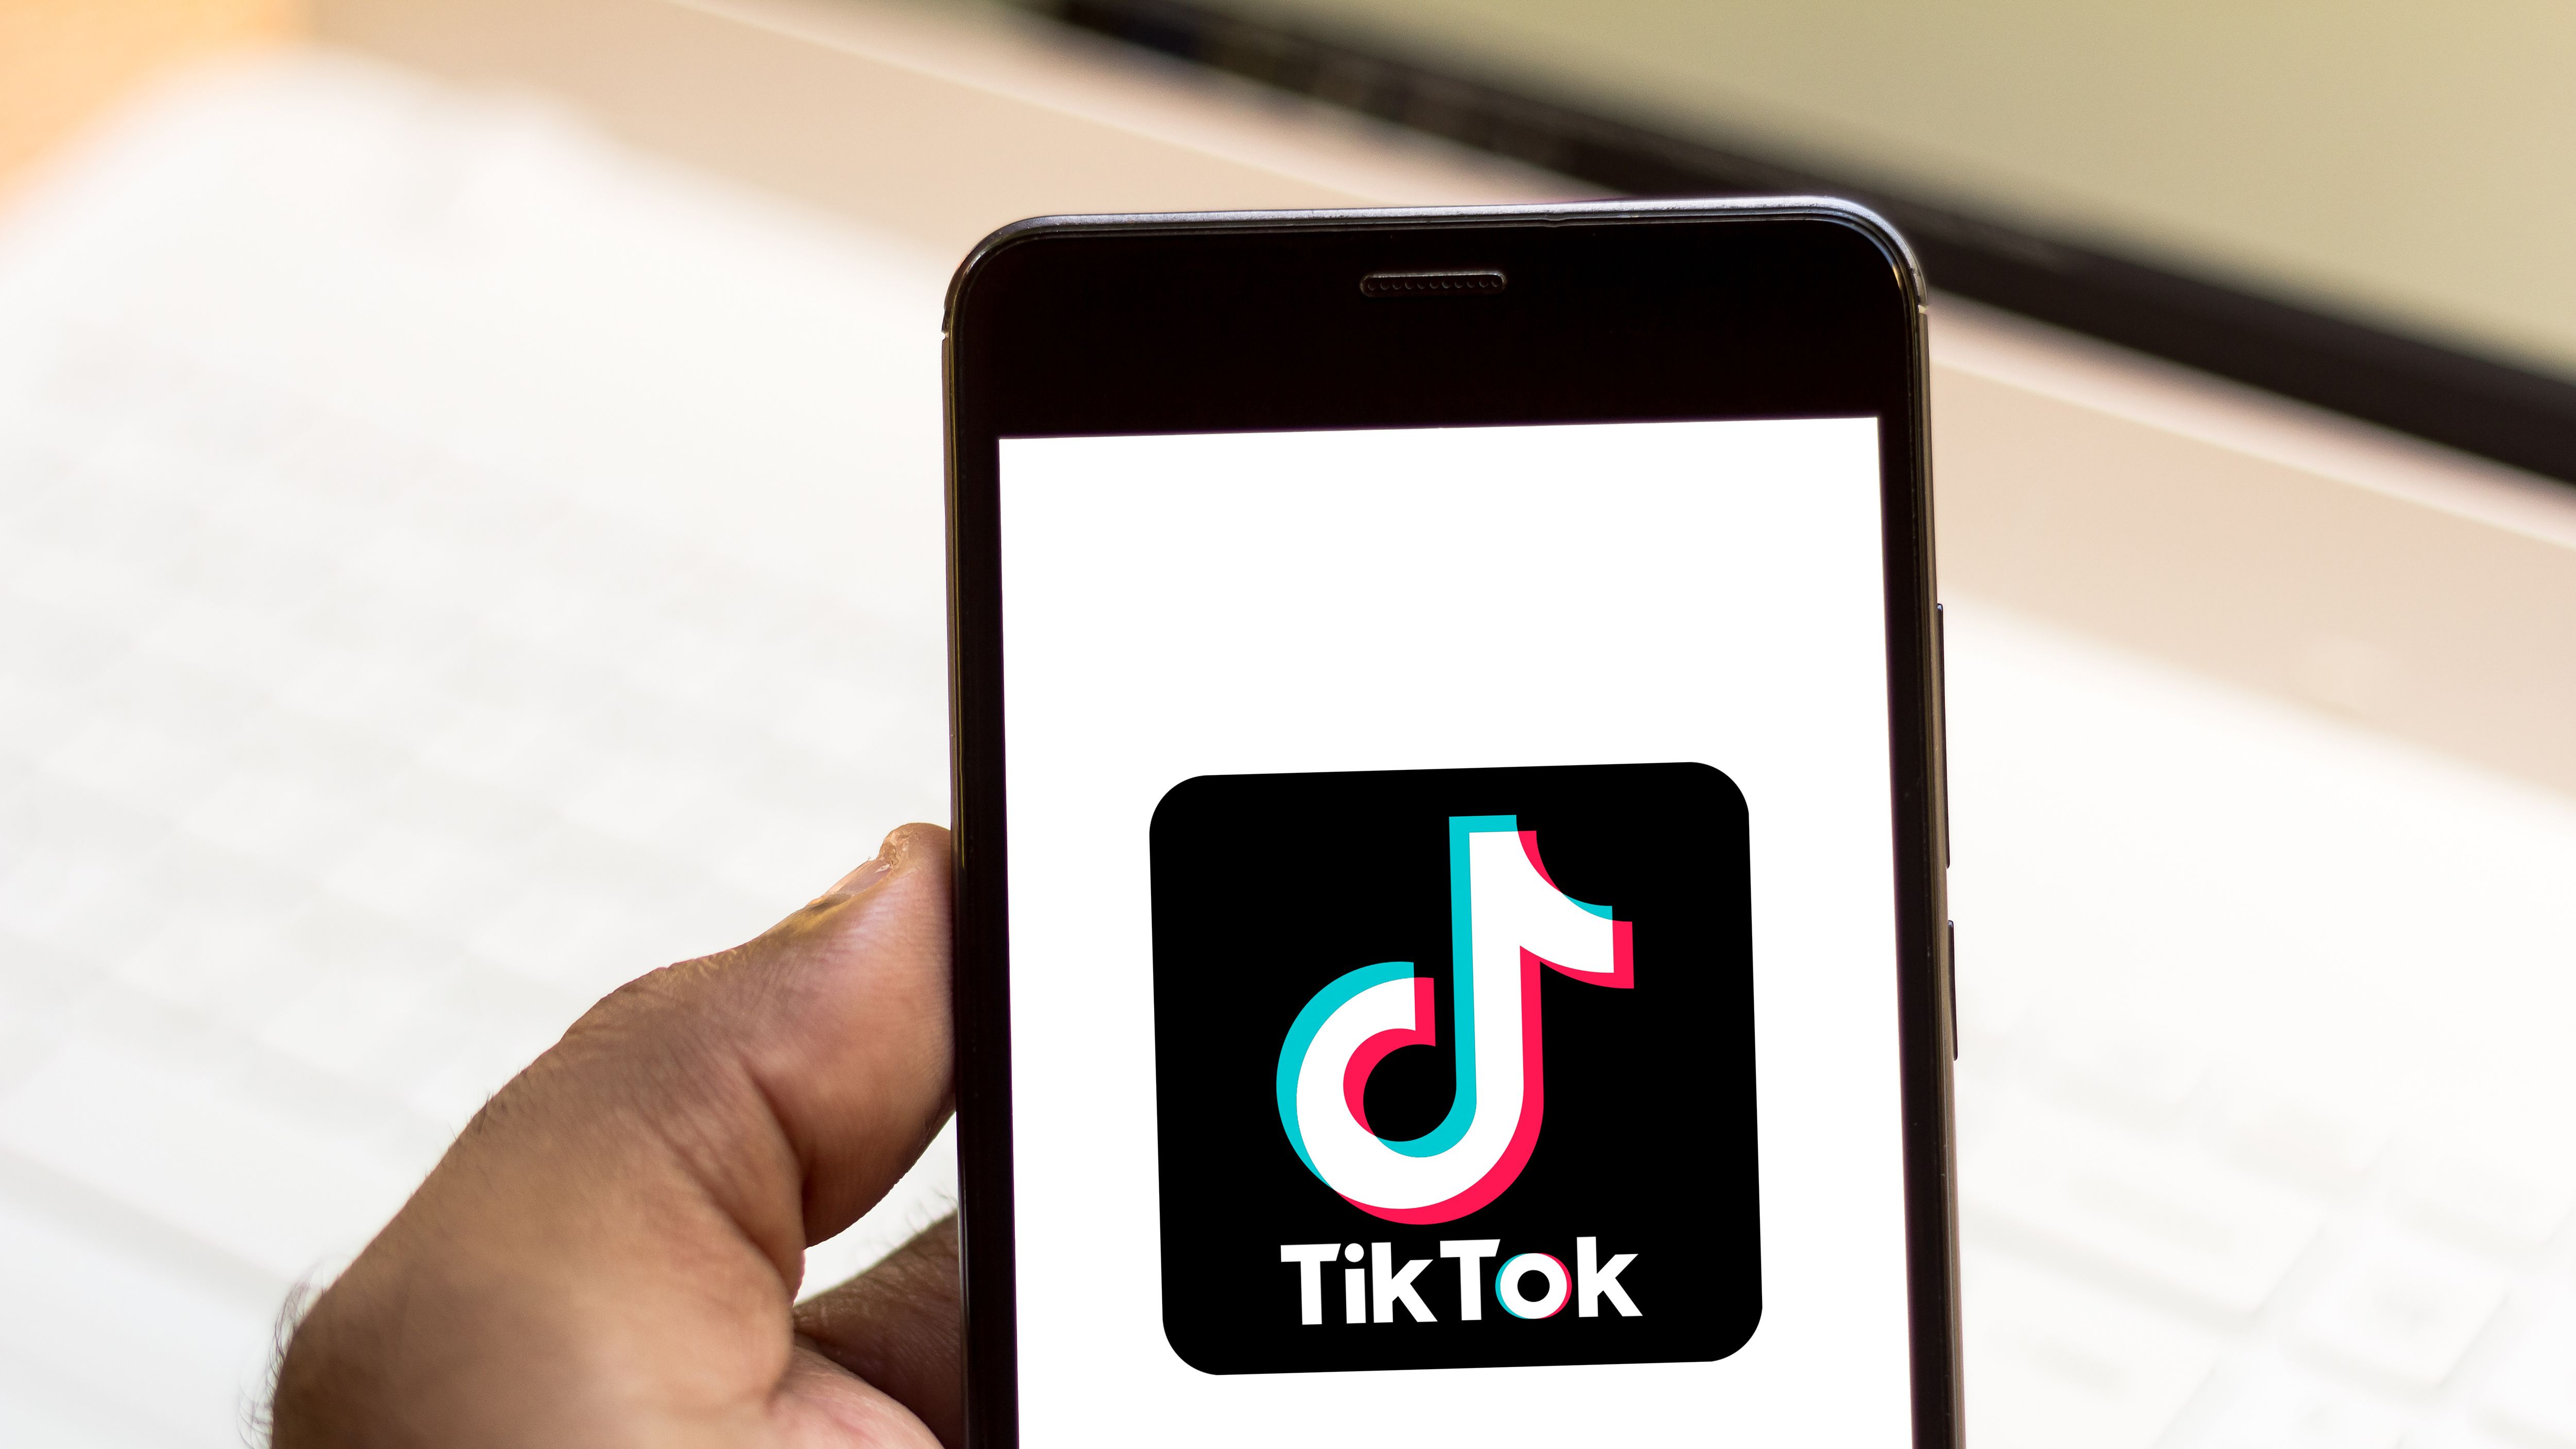 What Is TikTok? The Social Media App's Safety, Privacy and Memes Explained